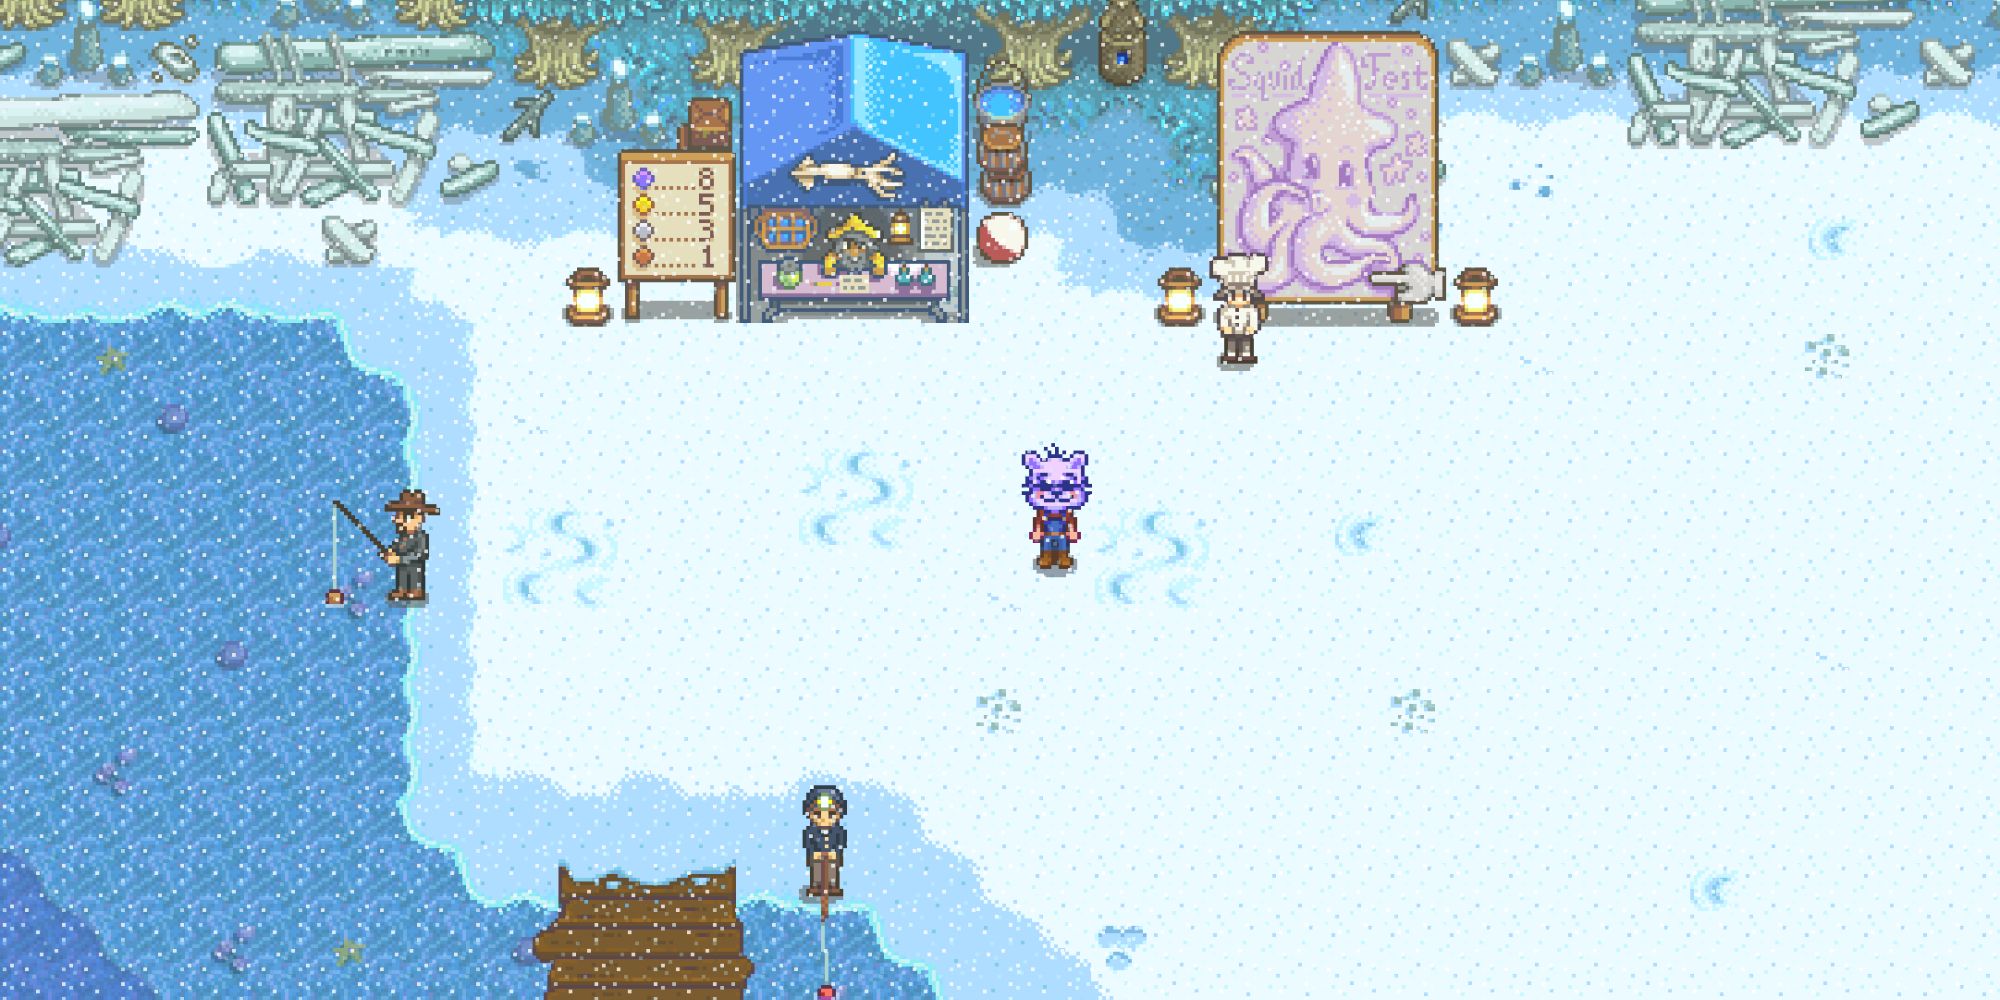 An image from a new fishing event in Stardew Valley called Squidfest. This event takes place over two days and requires you to catch 8 and 10 squid per day for rewards.